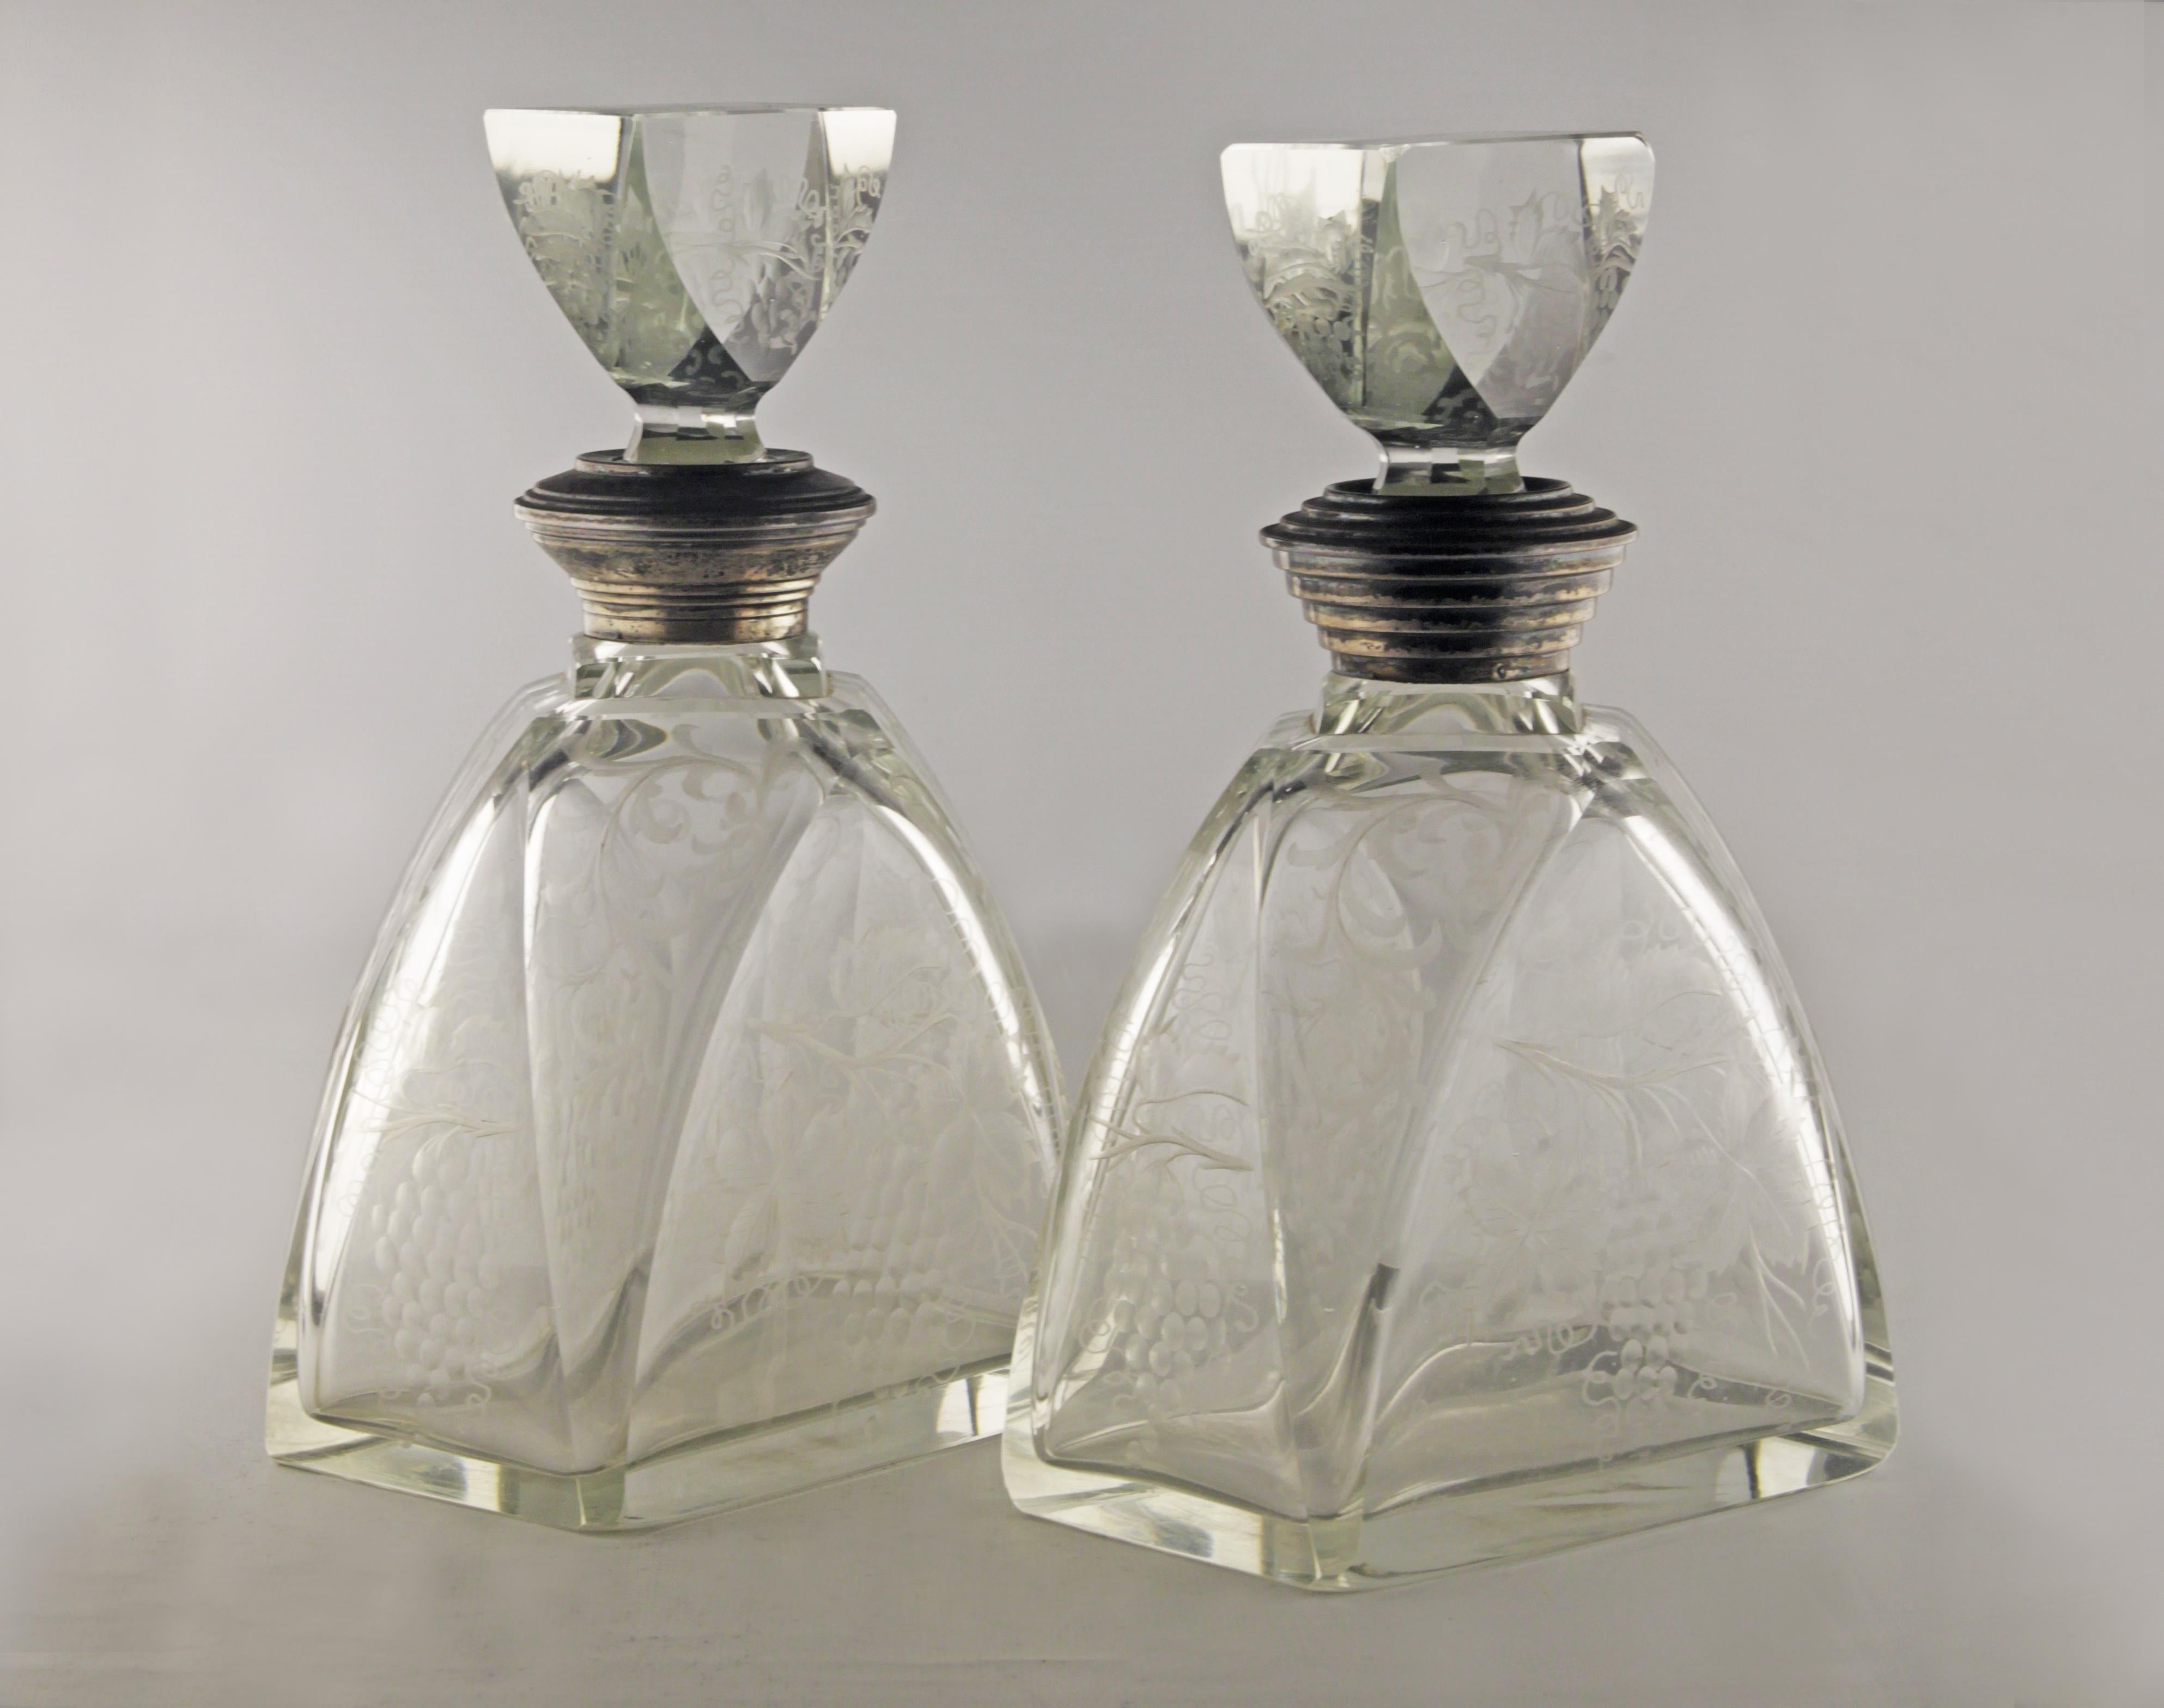 Pair of Art Déco etched glass liquor decanters and stoppers with sterling silver necks

By: unknown
Material: copper, glass, silver, sterling silver, crystal, cut glass, metal
Technique: etched, molded, metalwork, cast, polished
Dimensions: 4 in x 6